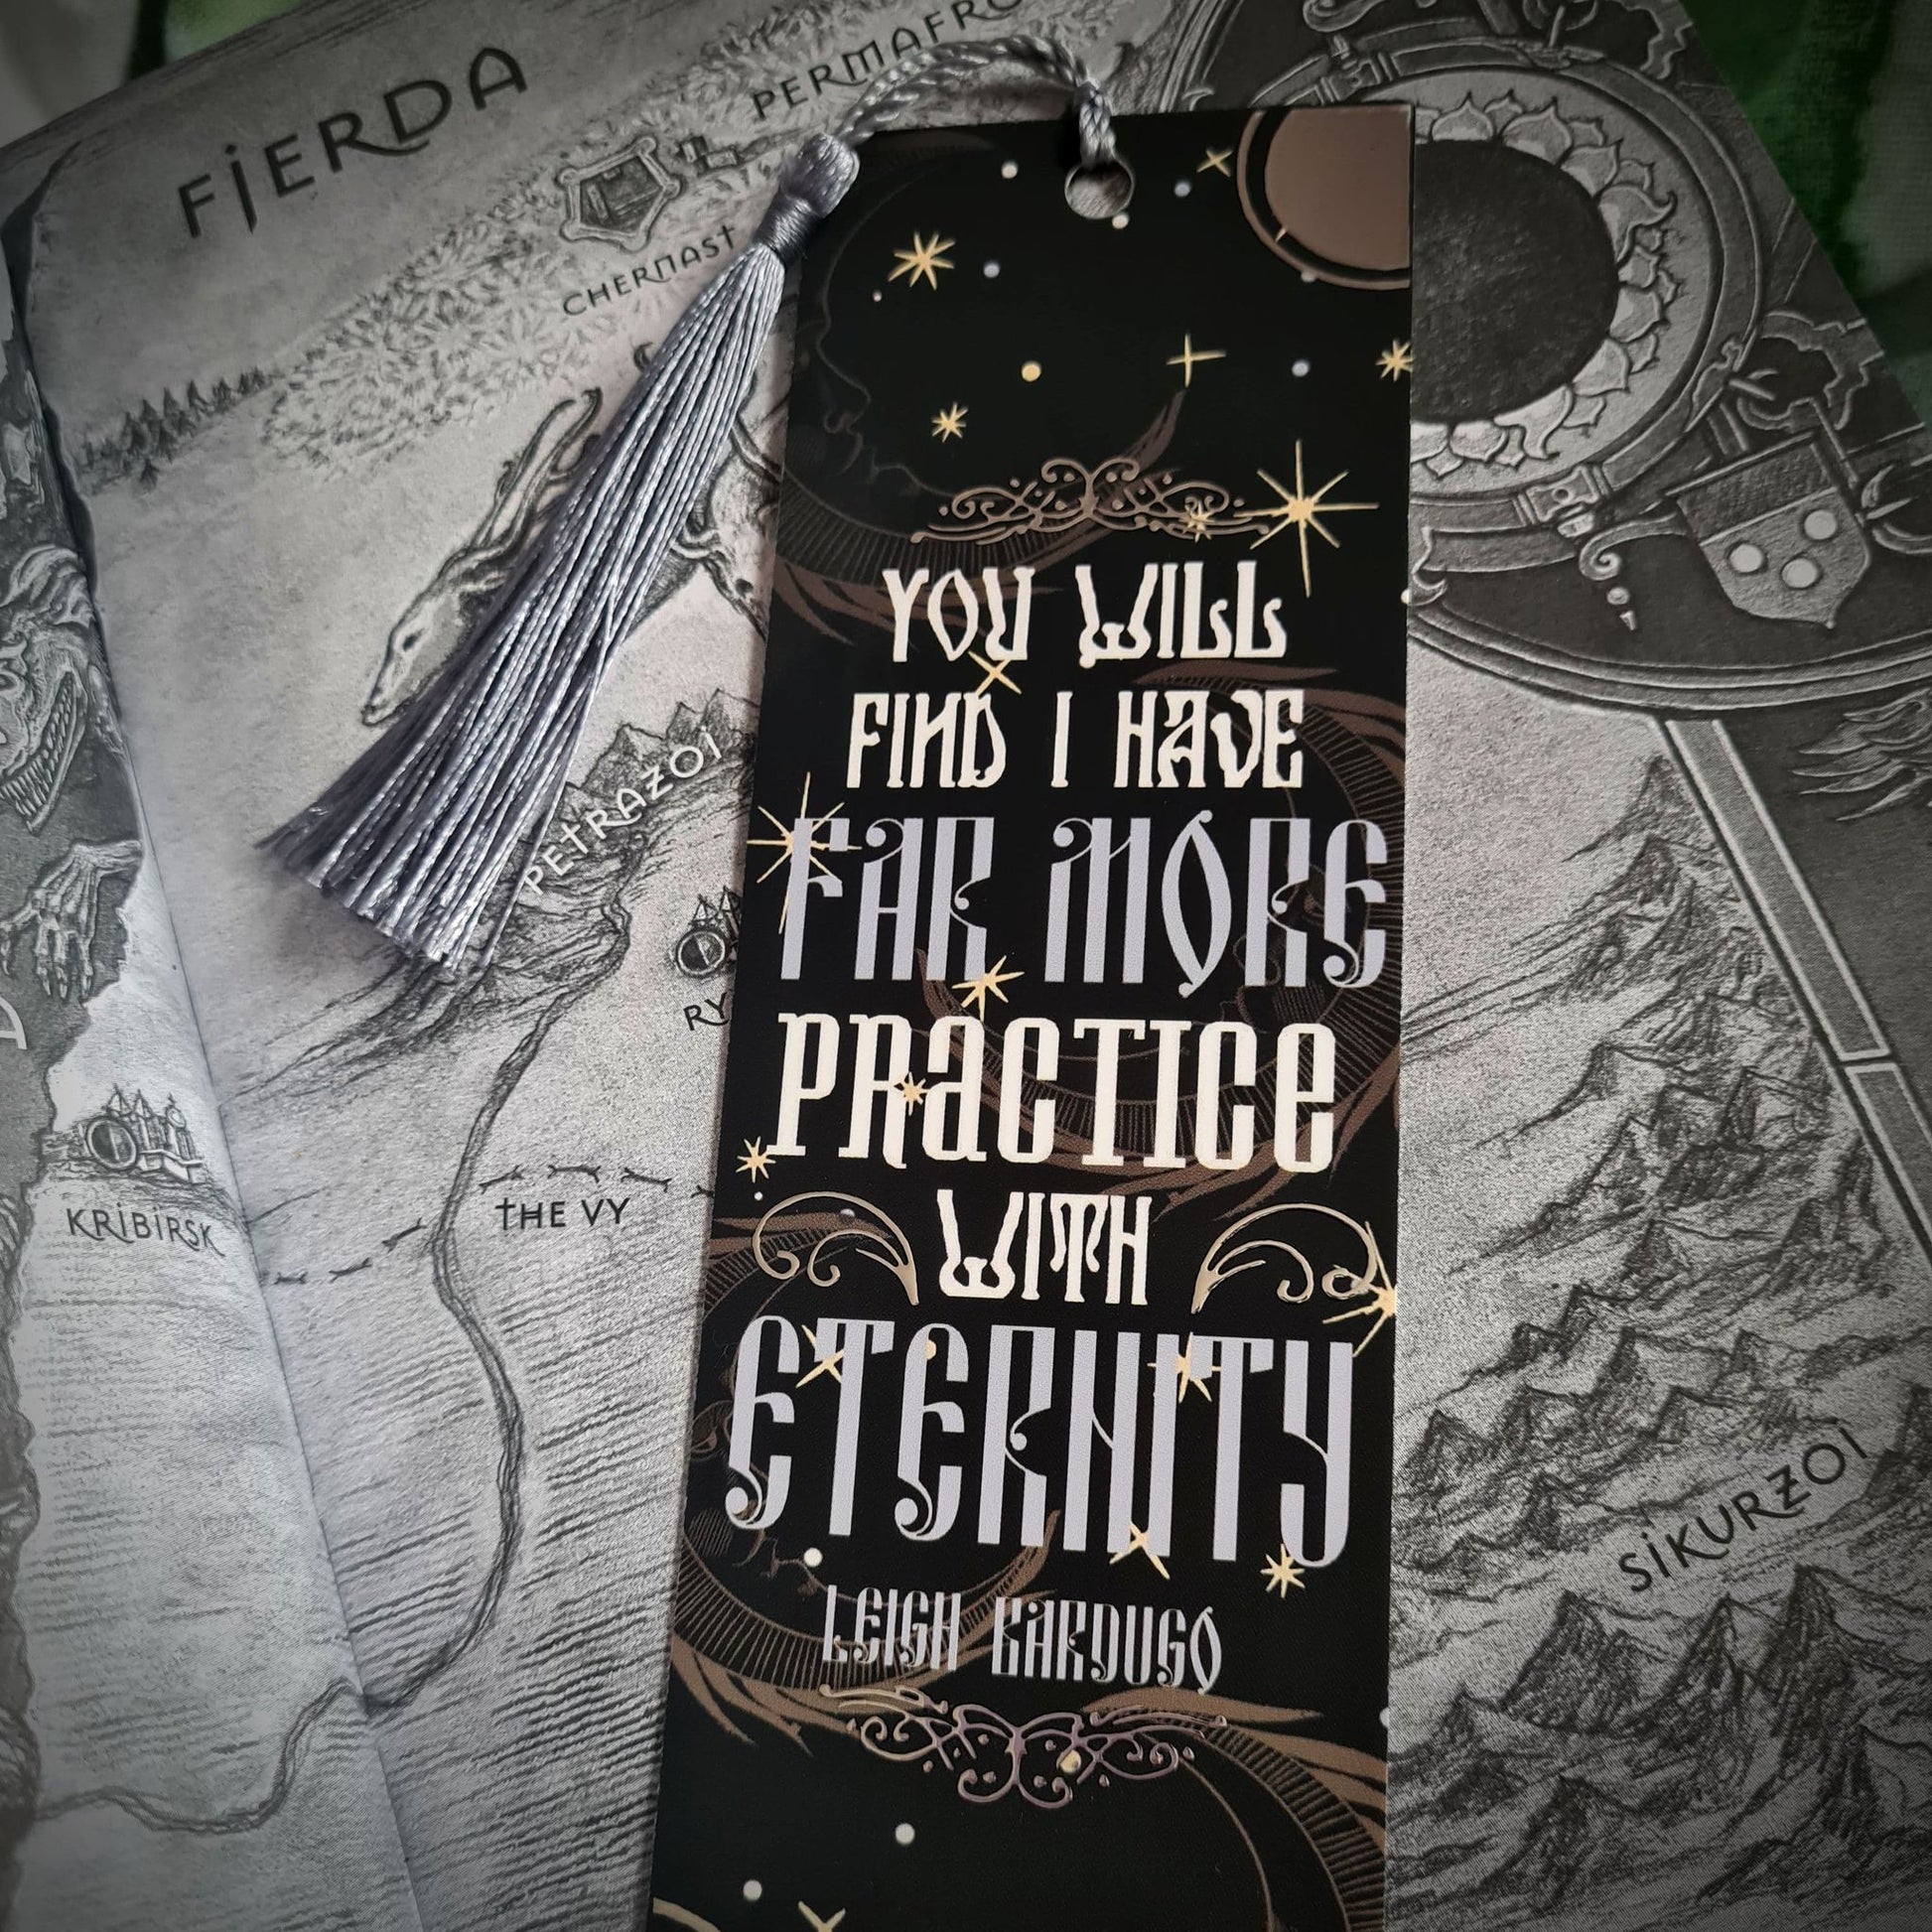 The Darkling Shadow and Bone Bookmark inspired by Leigh Bardugo's Grishaverse